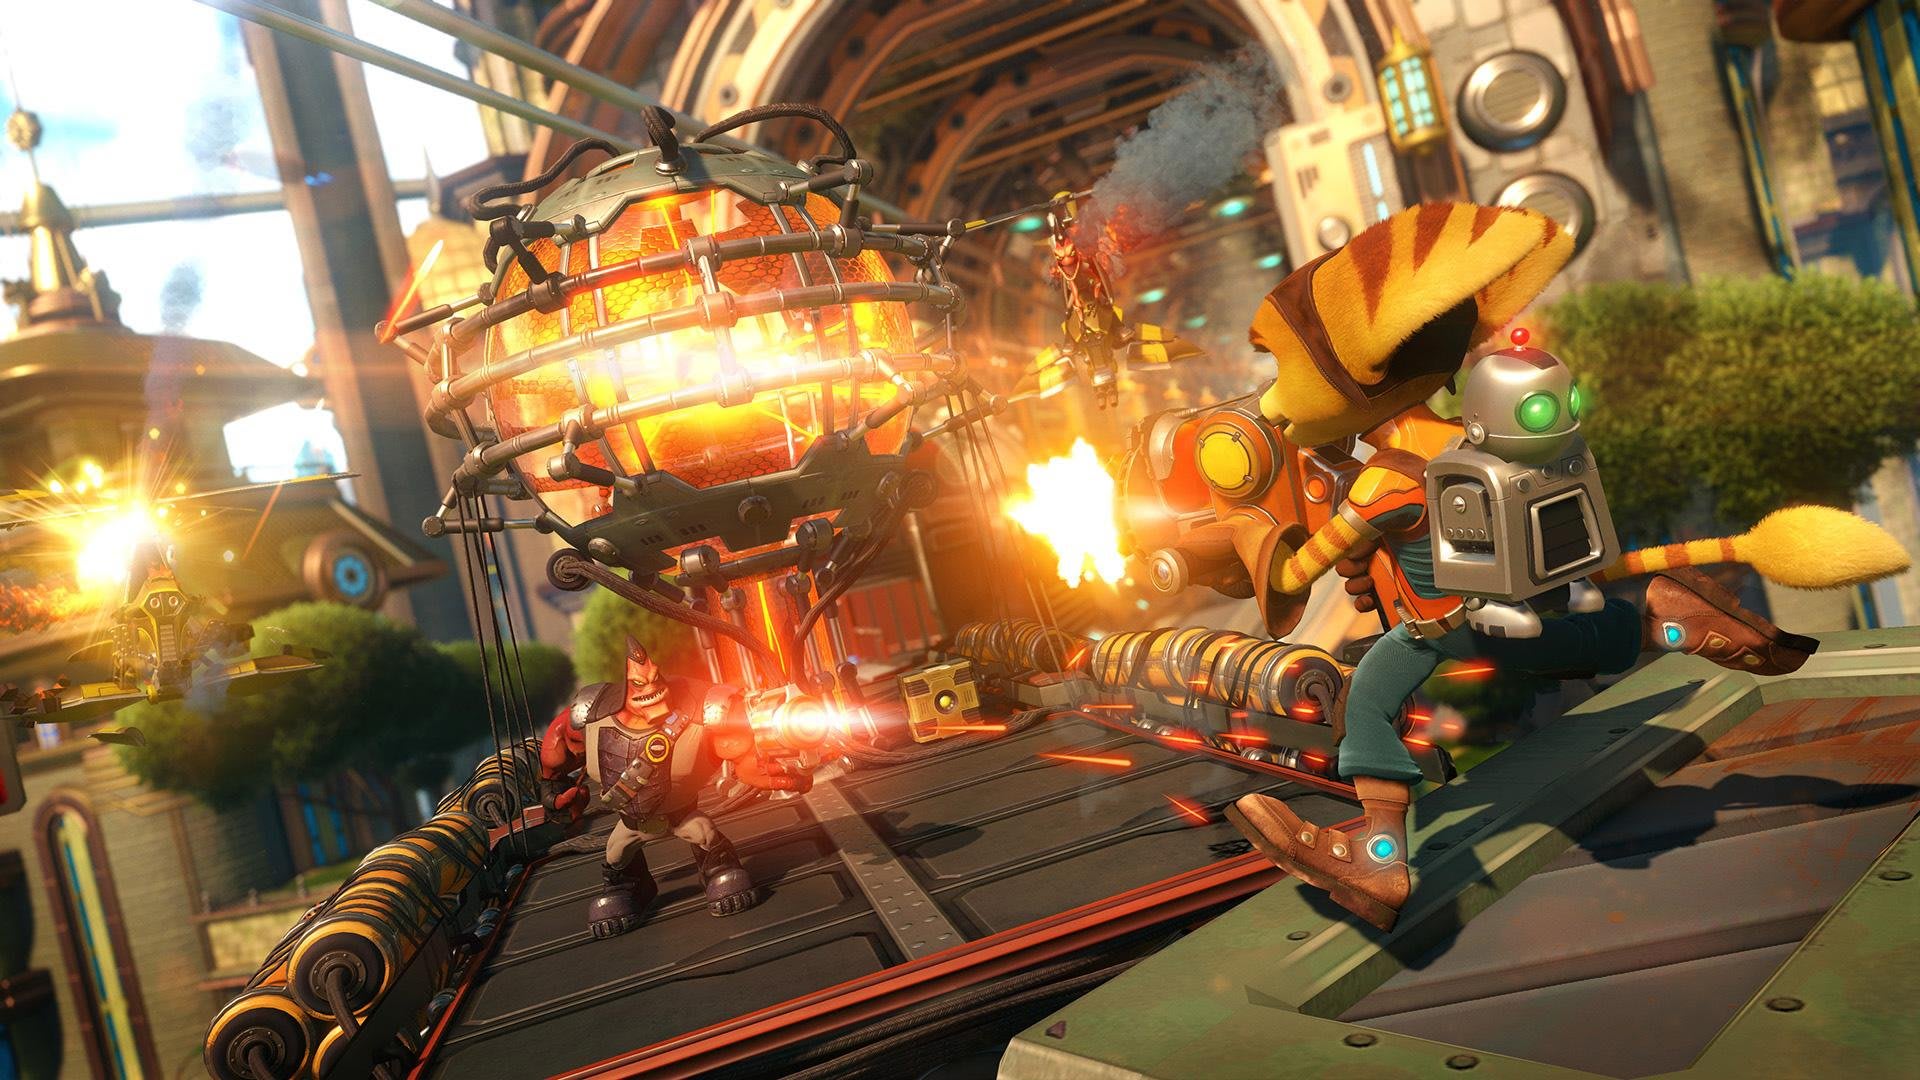 Ratchet and Clank tips: to become a better